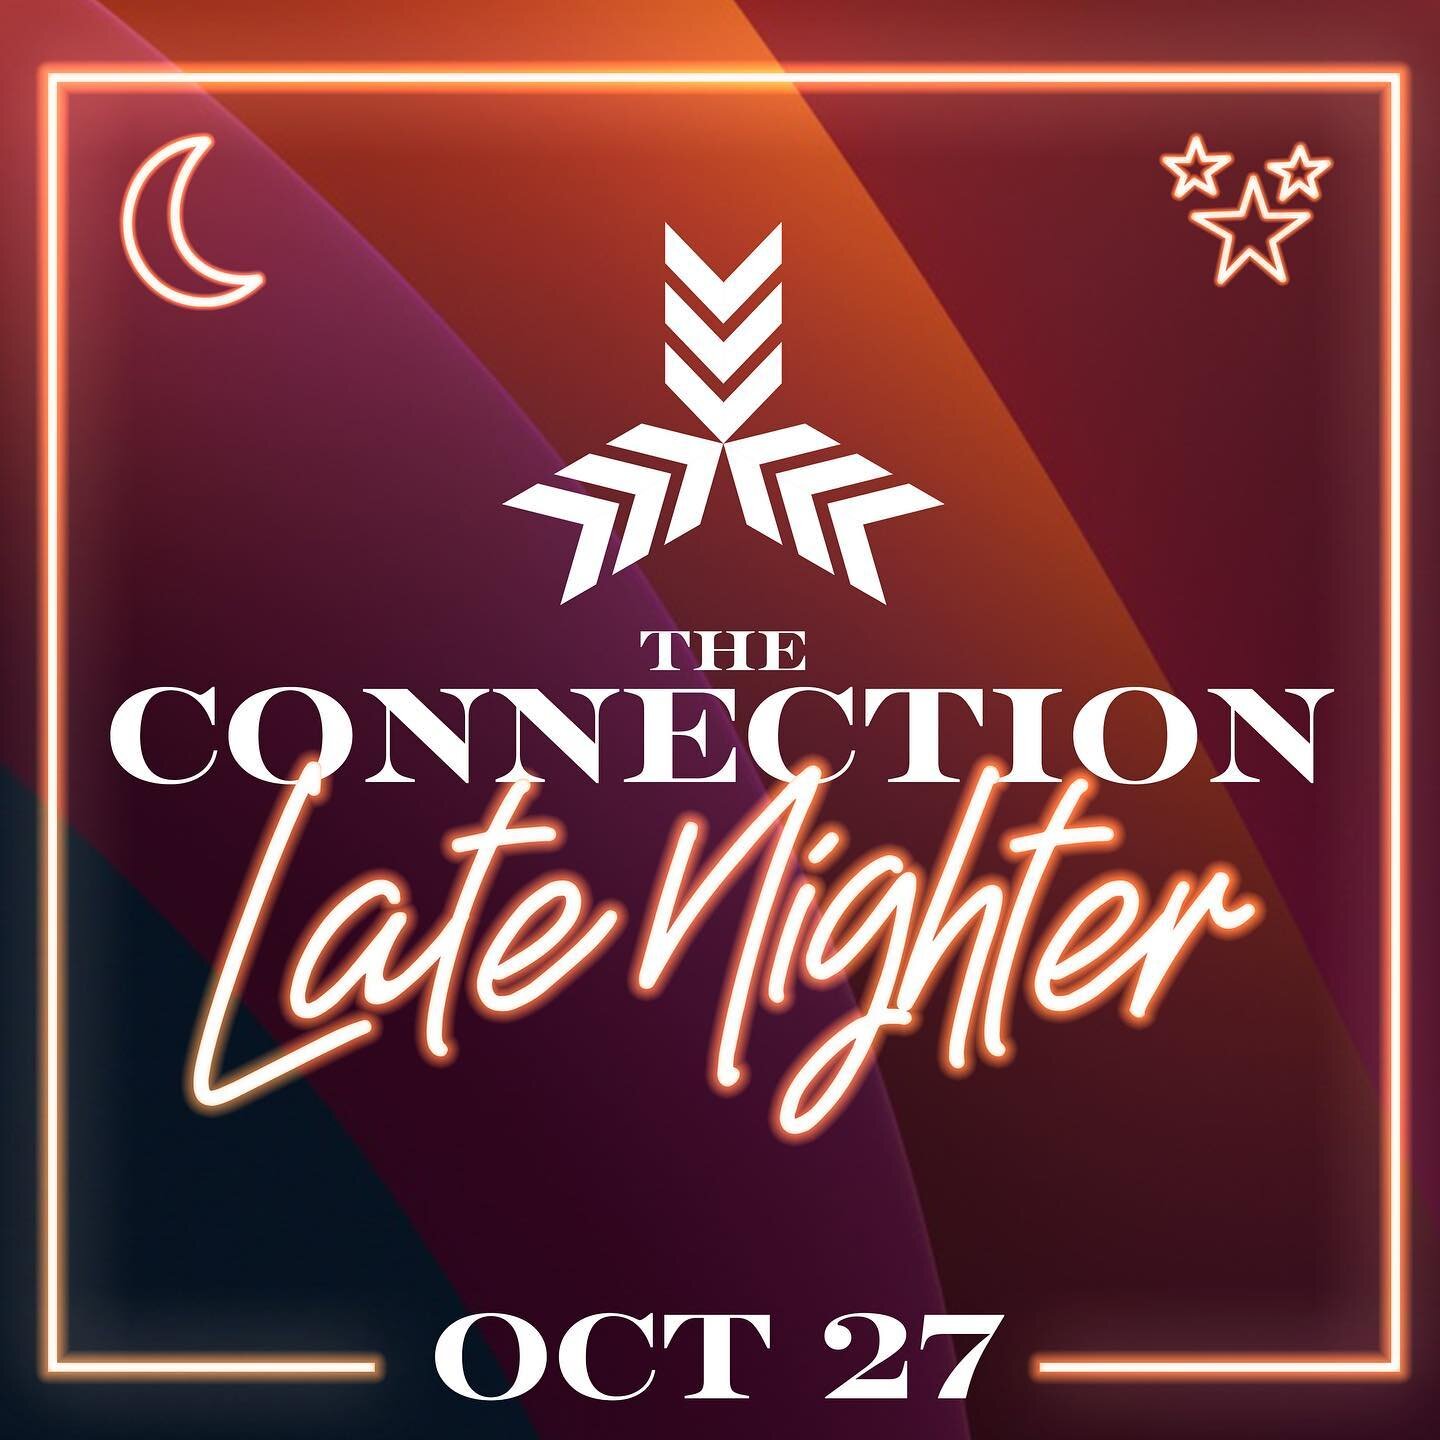 THE CONNECTION LATE NIGHTER ✨

The Connection Partners (Lakeview Youth, GroveYouth, California Breakaway, and Camp Kadesh) are excited to bring you The Connection Fall Late Nighter!

This will be a sweet night of doing so many fun things with so many